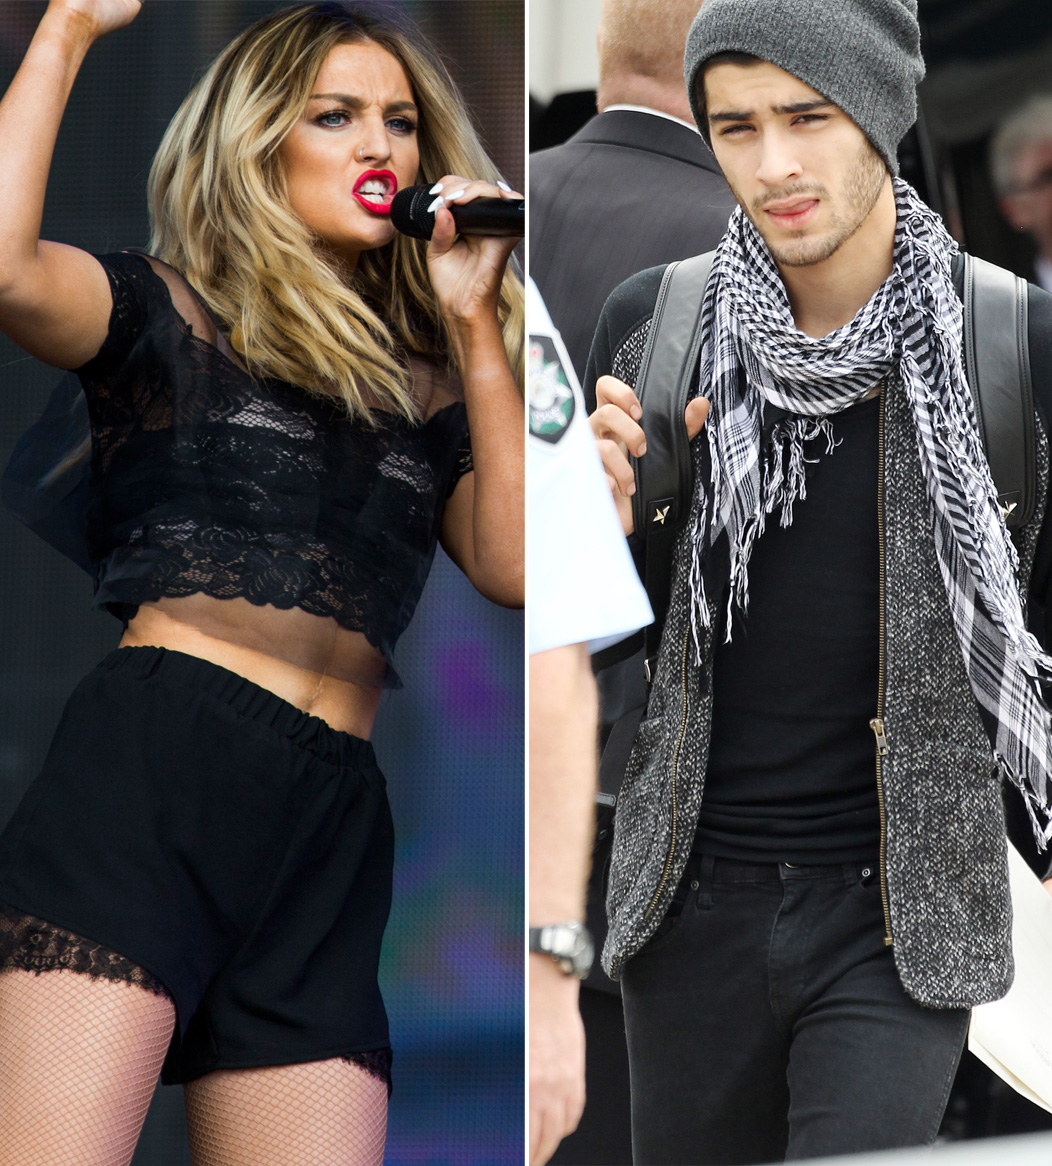 Perrie Edwards Says Her Relationship With Zayn Malik Difficult